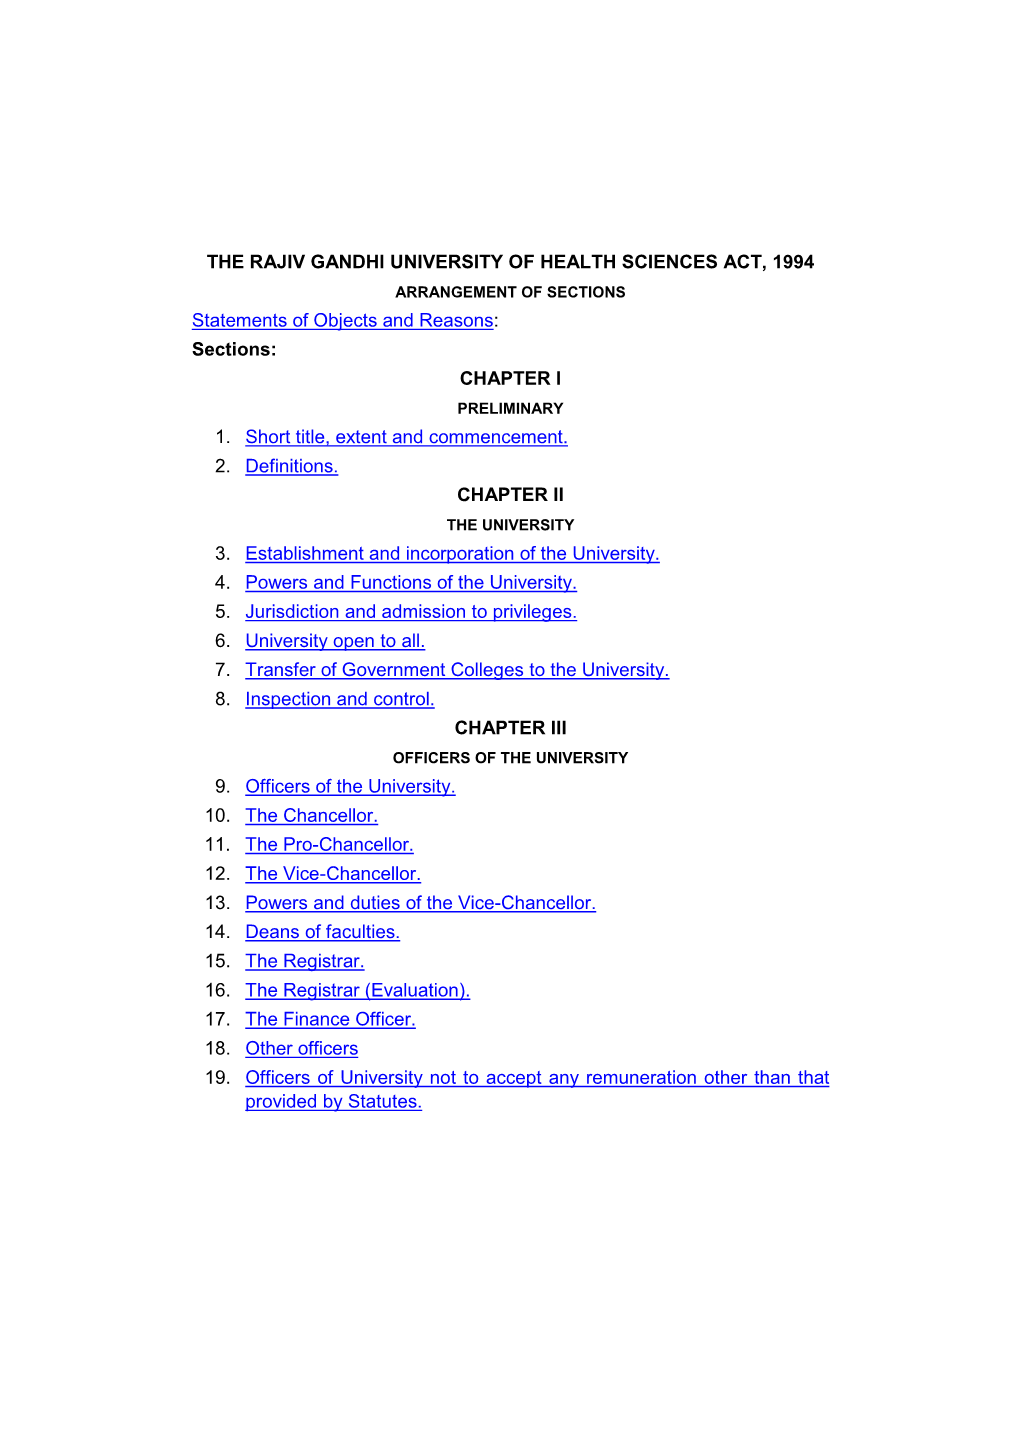 THE RAJIV GANDHI UNIVERSITY of HEALTH SCIENCES ACT, 1994 ARRANGEMENT of SECTIONS Statements of Objects and Reasons: Sections: CHAPTER I PRELIMINARY 1